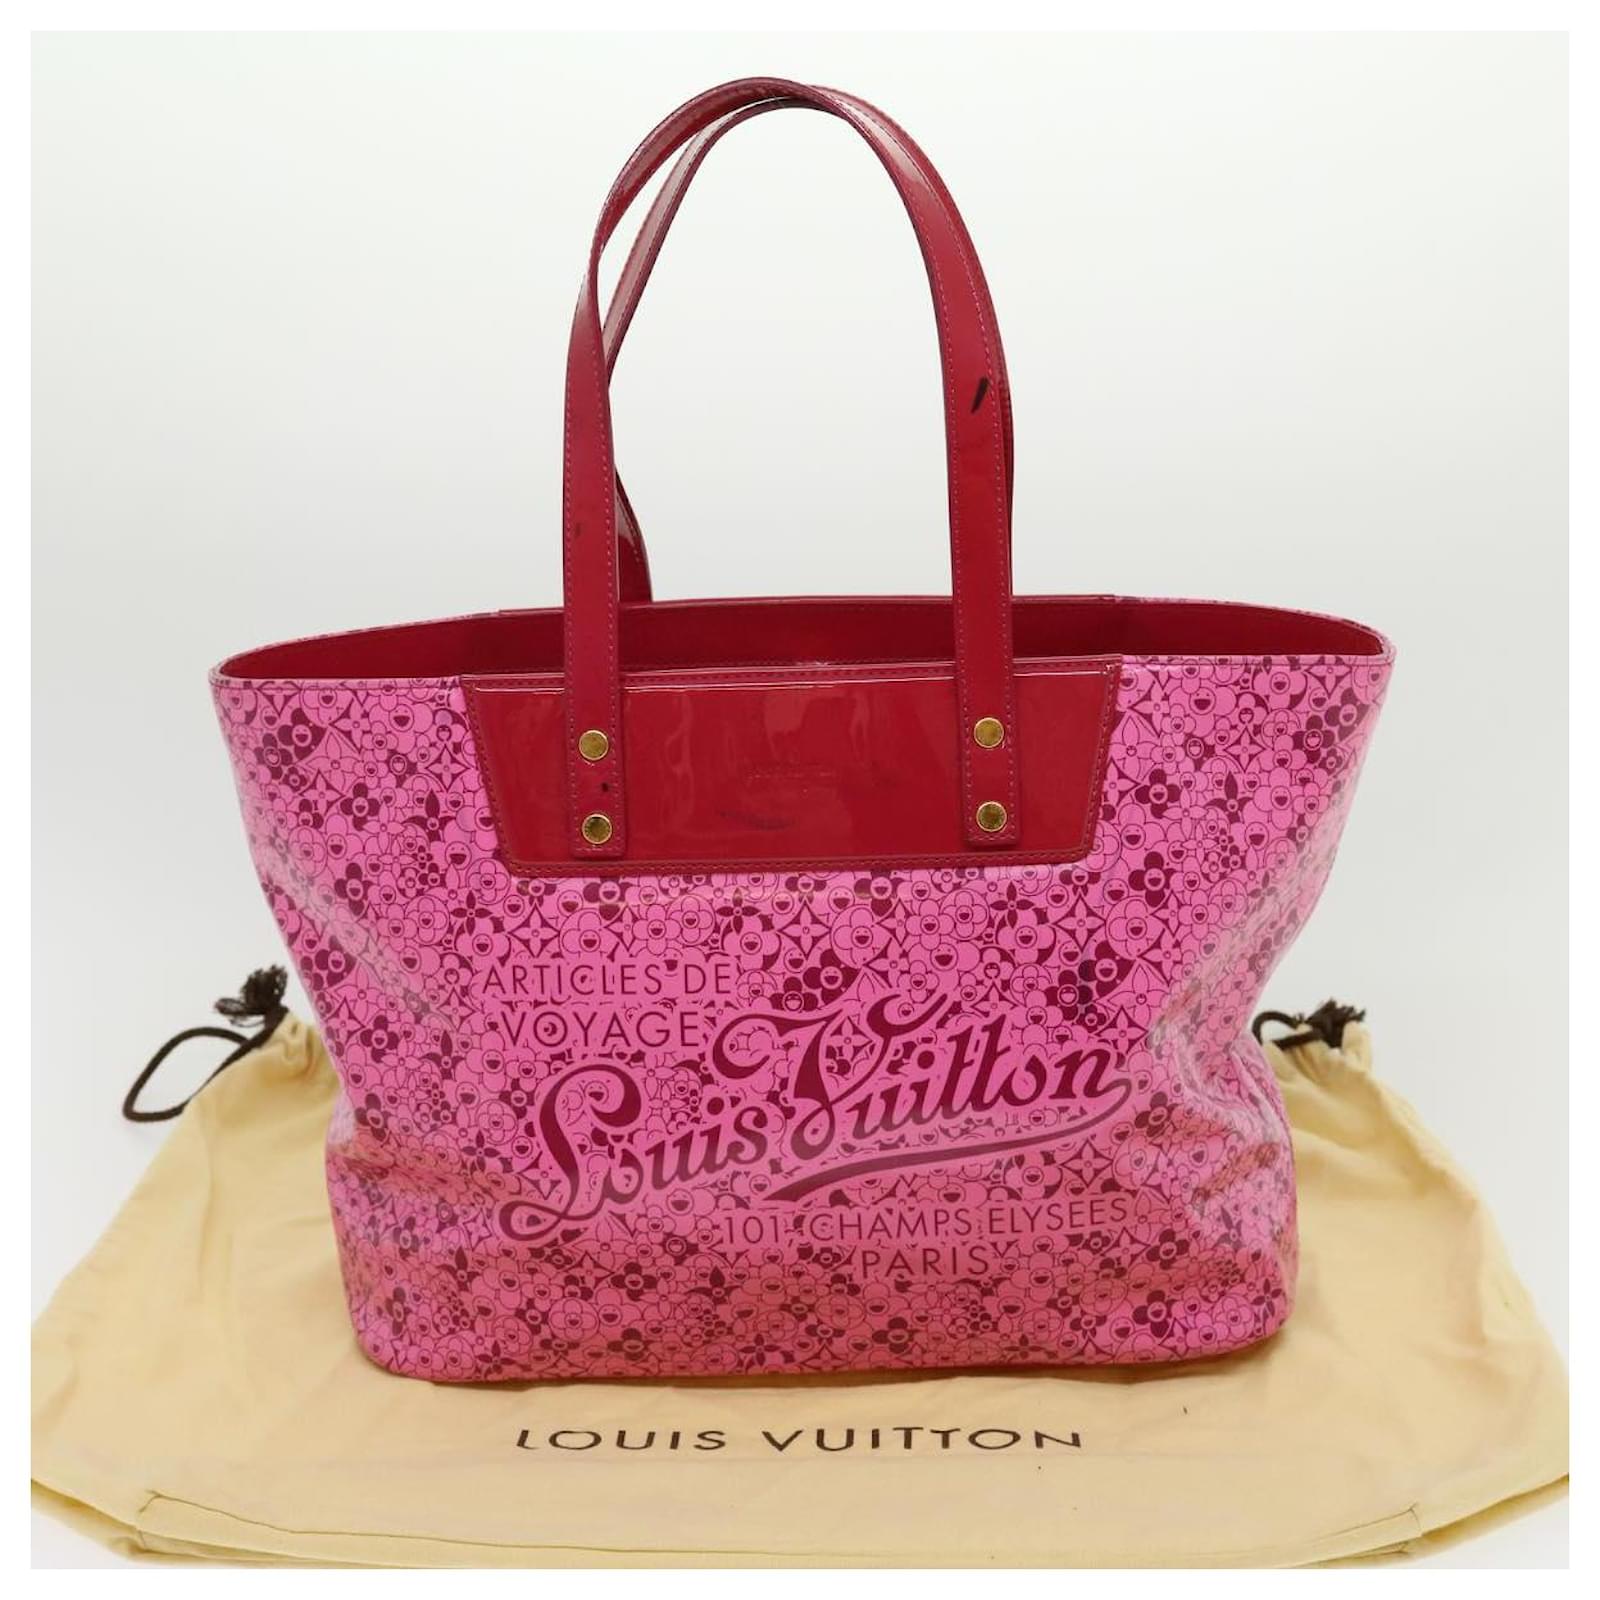 LOUIS VUITTON Cosmic Blossom PM Tote Bag Pink M93160 LV Auth